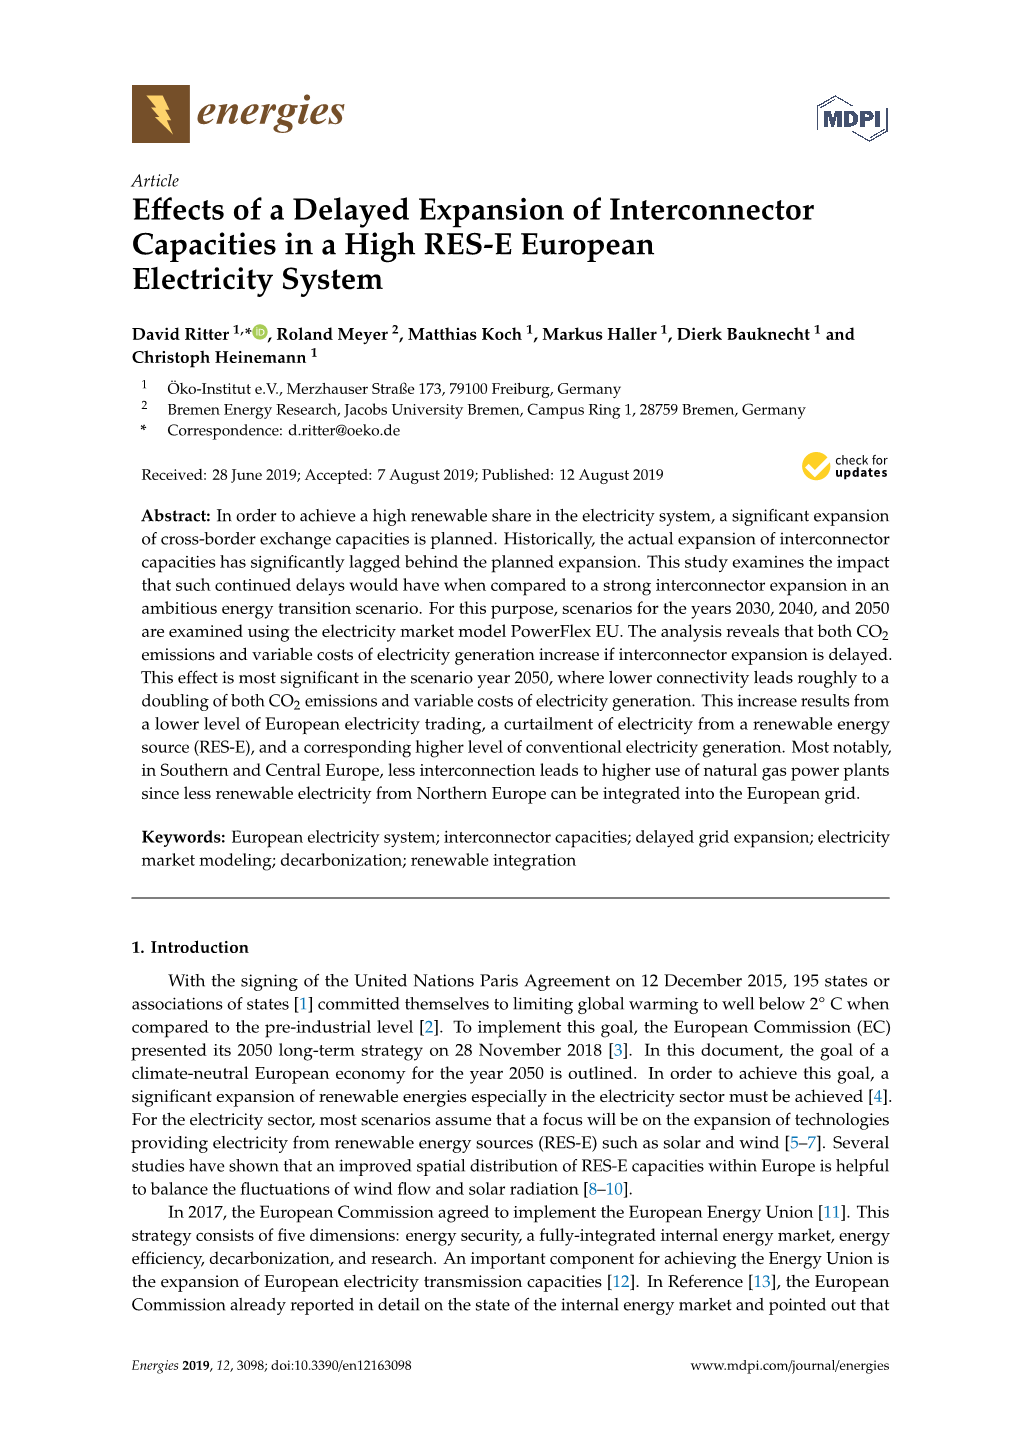 Effects of a Delayed Expansion of Interconnector Capacities in a High